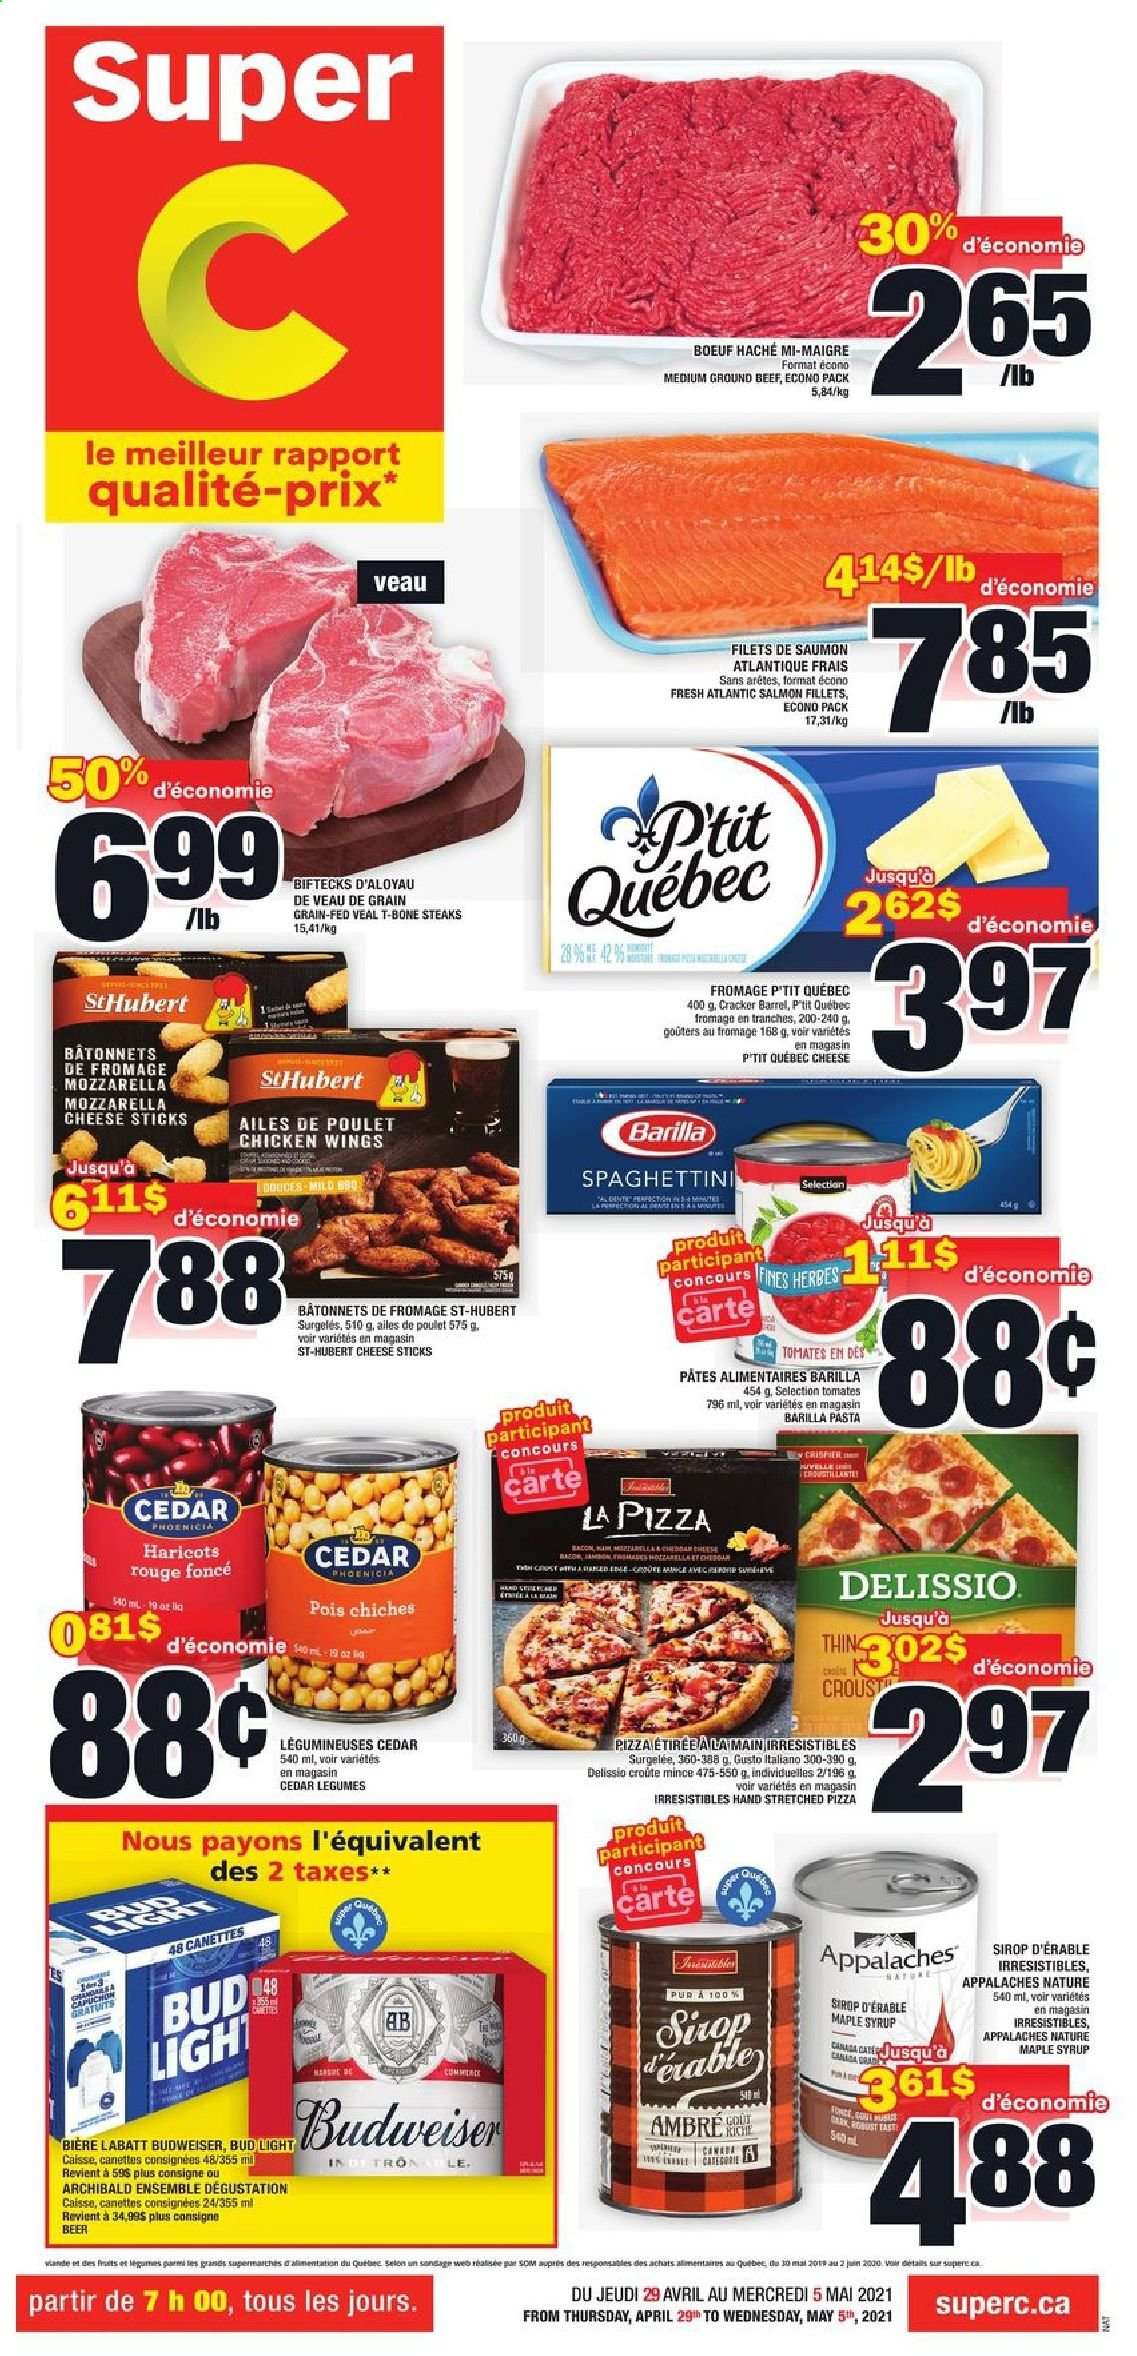 thumbnail - Super C Flyer - April 29, 2021 - May 05, 2021 - Sales products - salmon, salmon fillet, pizza, pasta, Barilla, bacon, chicken wings, cheese sticks, crackers, maple syrup, syrup, beer, Budweiser, Bud Light, beef meat, ground beef, t-bone steak, steak. Page 1.